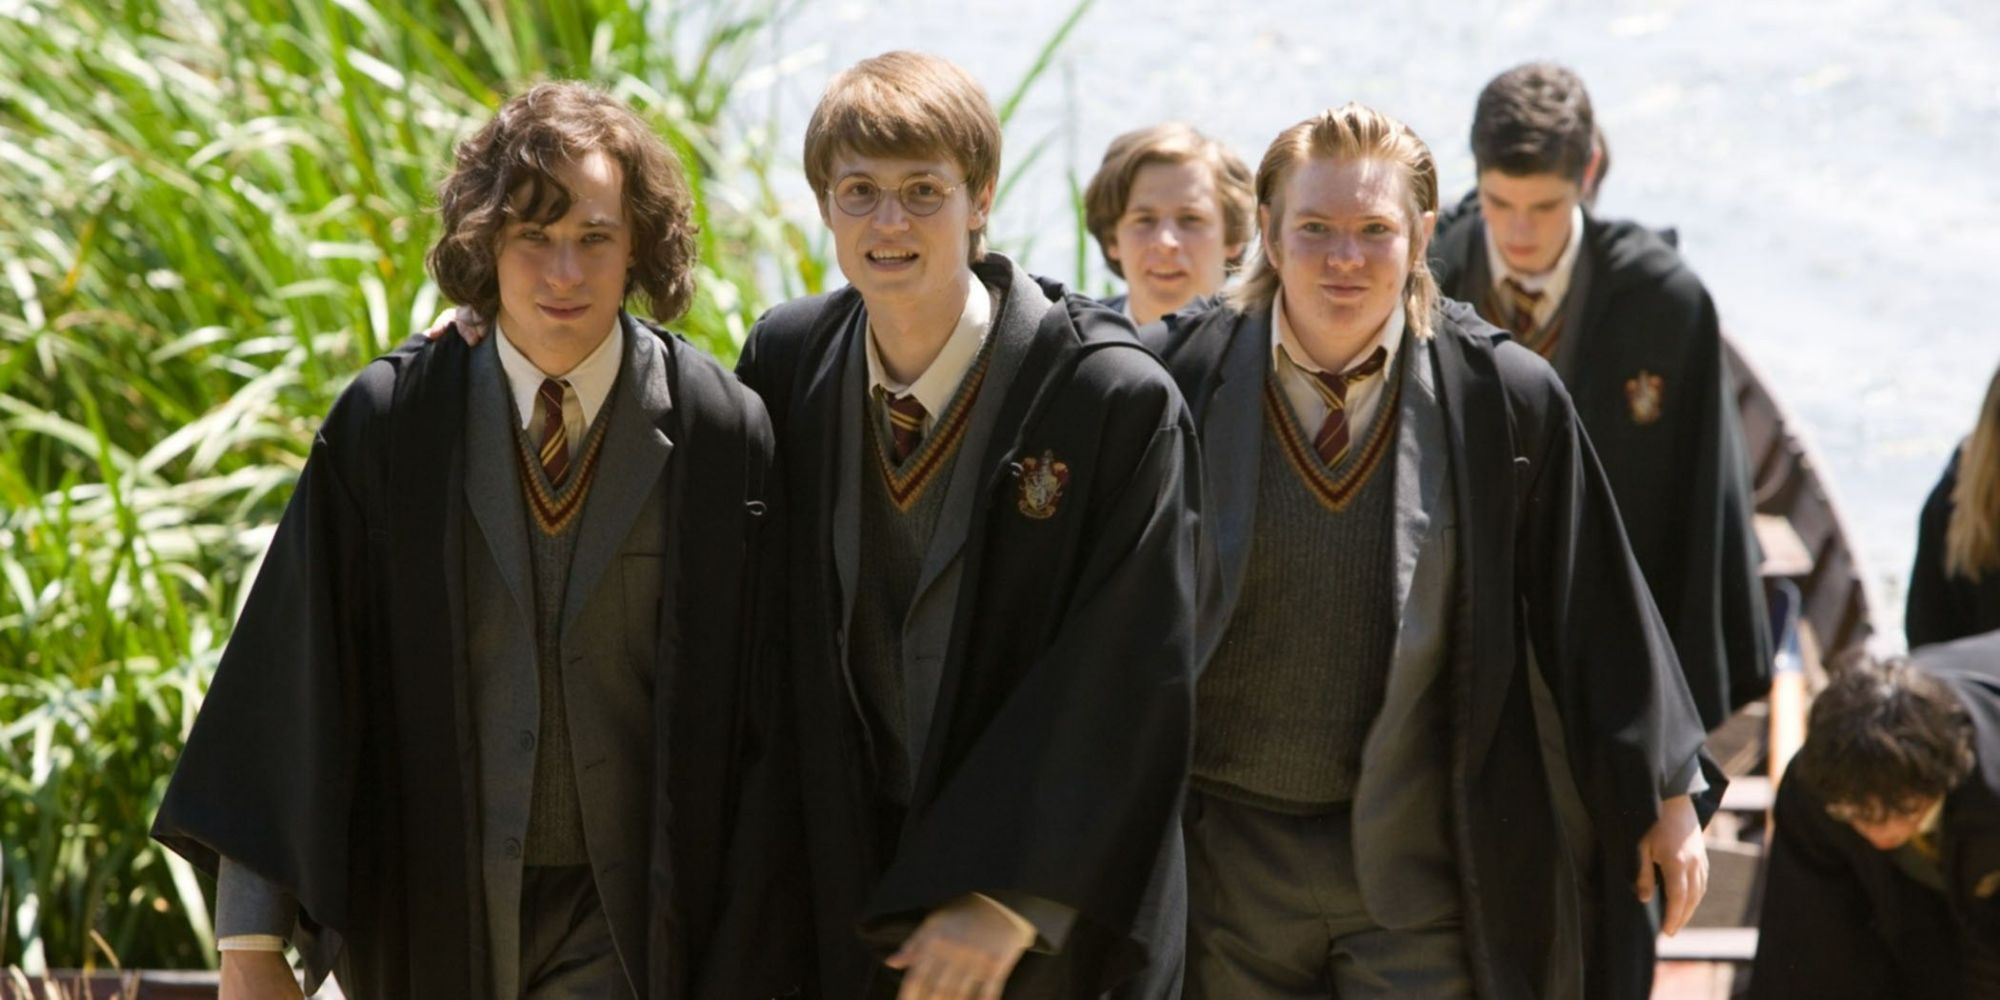 James Potter, Sirius Black and Peter Pettigrew at Hogwarts in a Harry Potter flashback